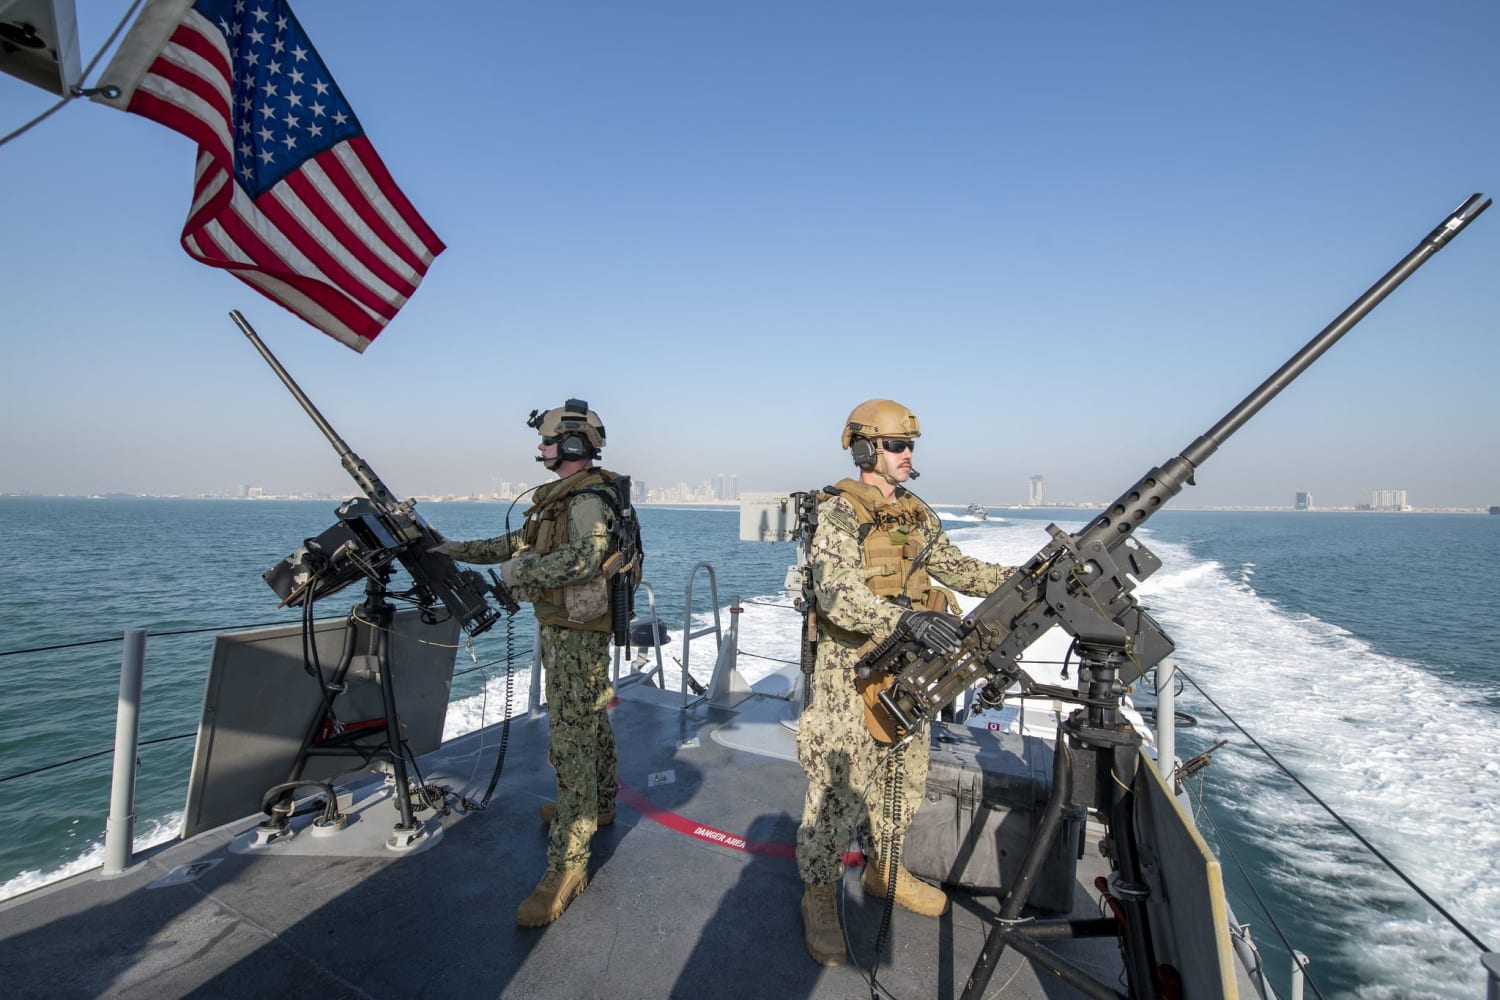 U.S. Navy warns mariners to stay clear of its warships in the Persian Gulf